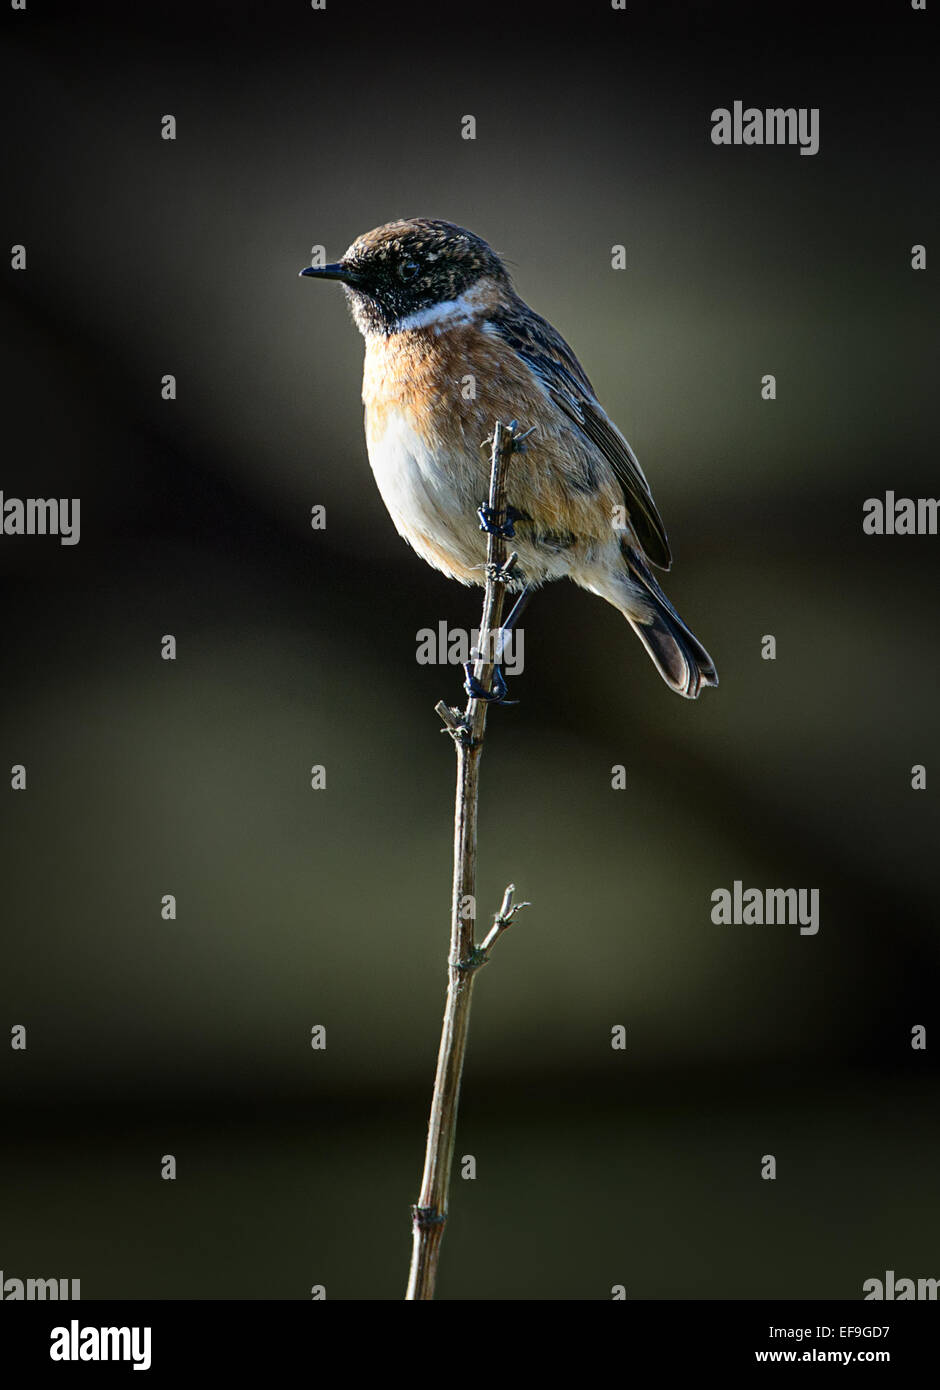 Stonechat on a twig with a dark background Stock Photo